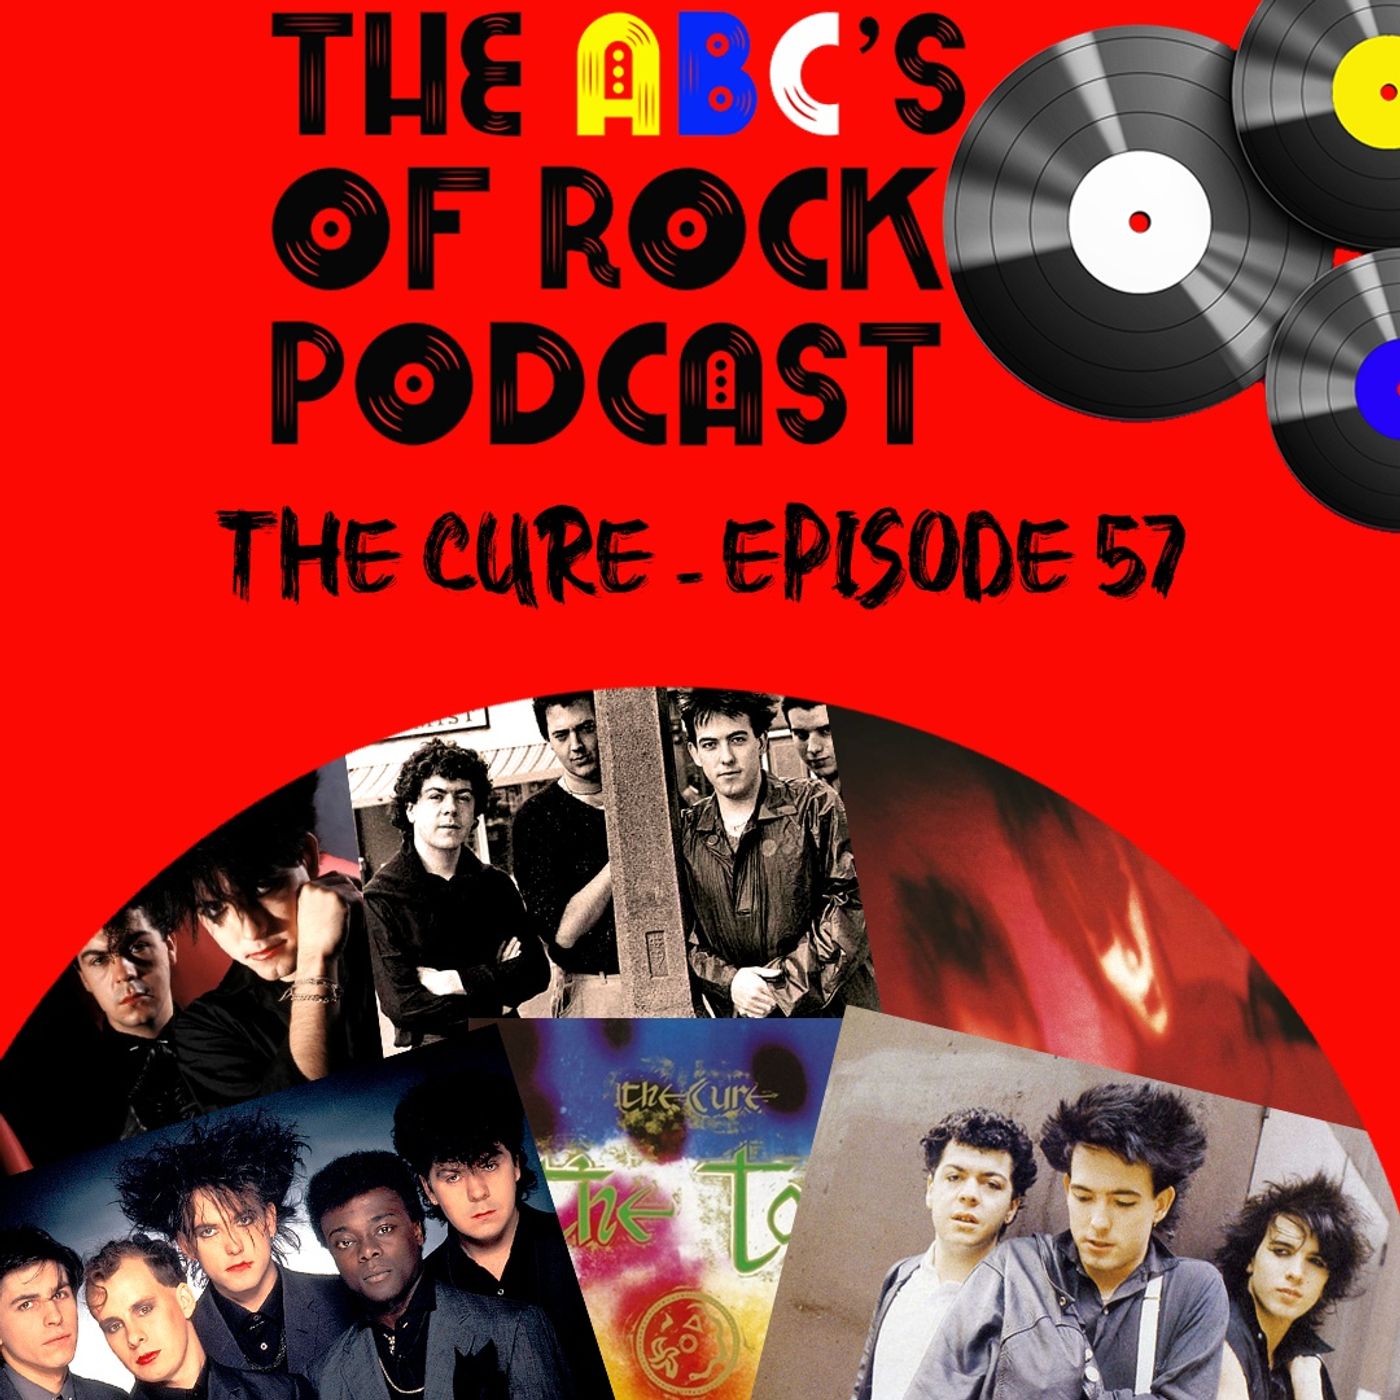 The Cure - “The Moon Will Change Your Mind” - Episode 57